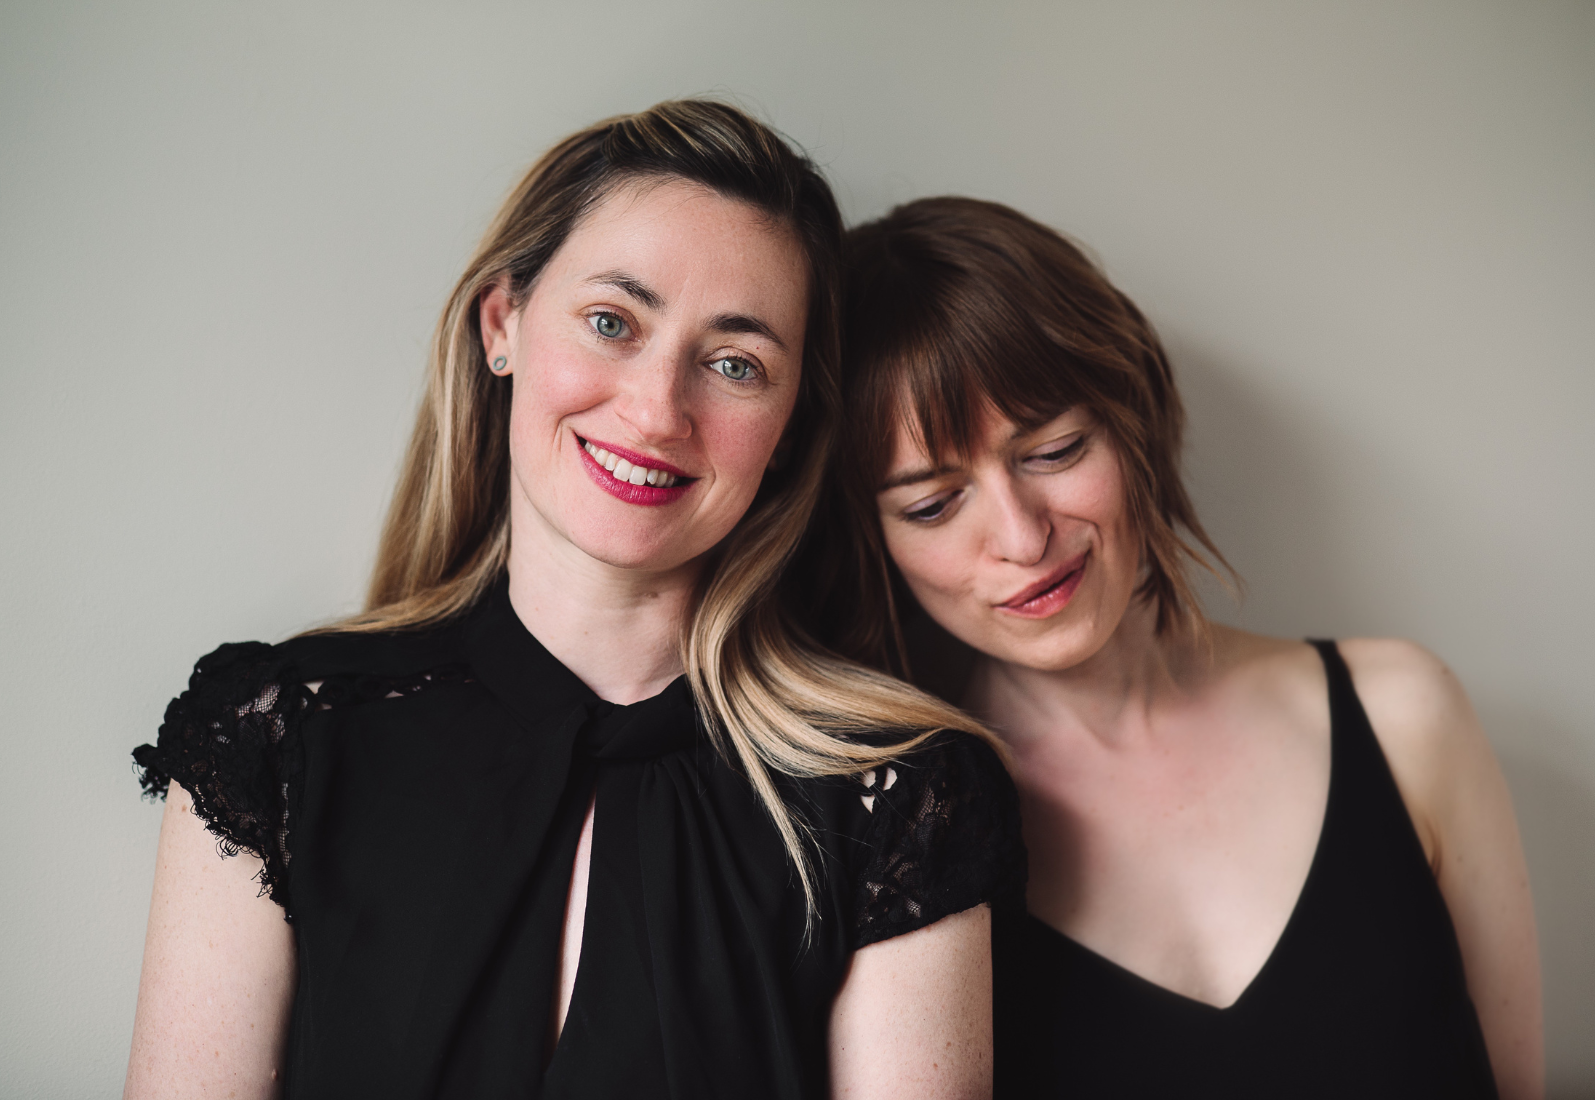 Fenella Humphreys and Leah Broad will perform Lost Voices at Harrogate Music Festival